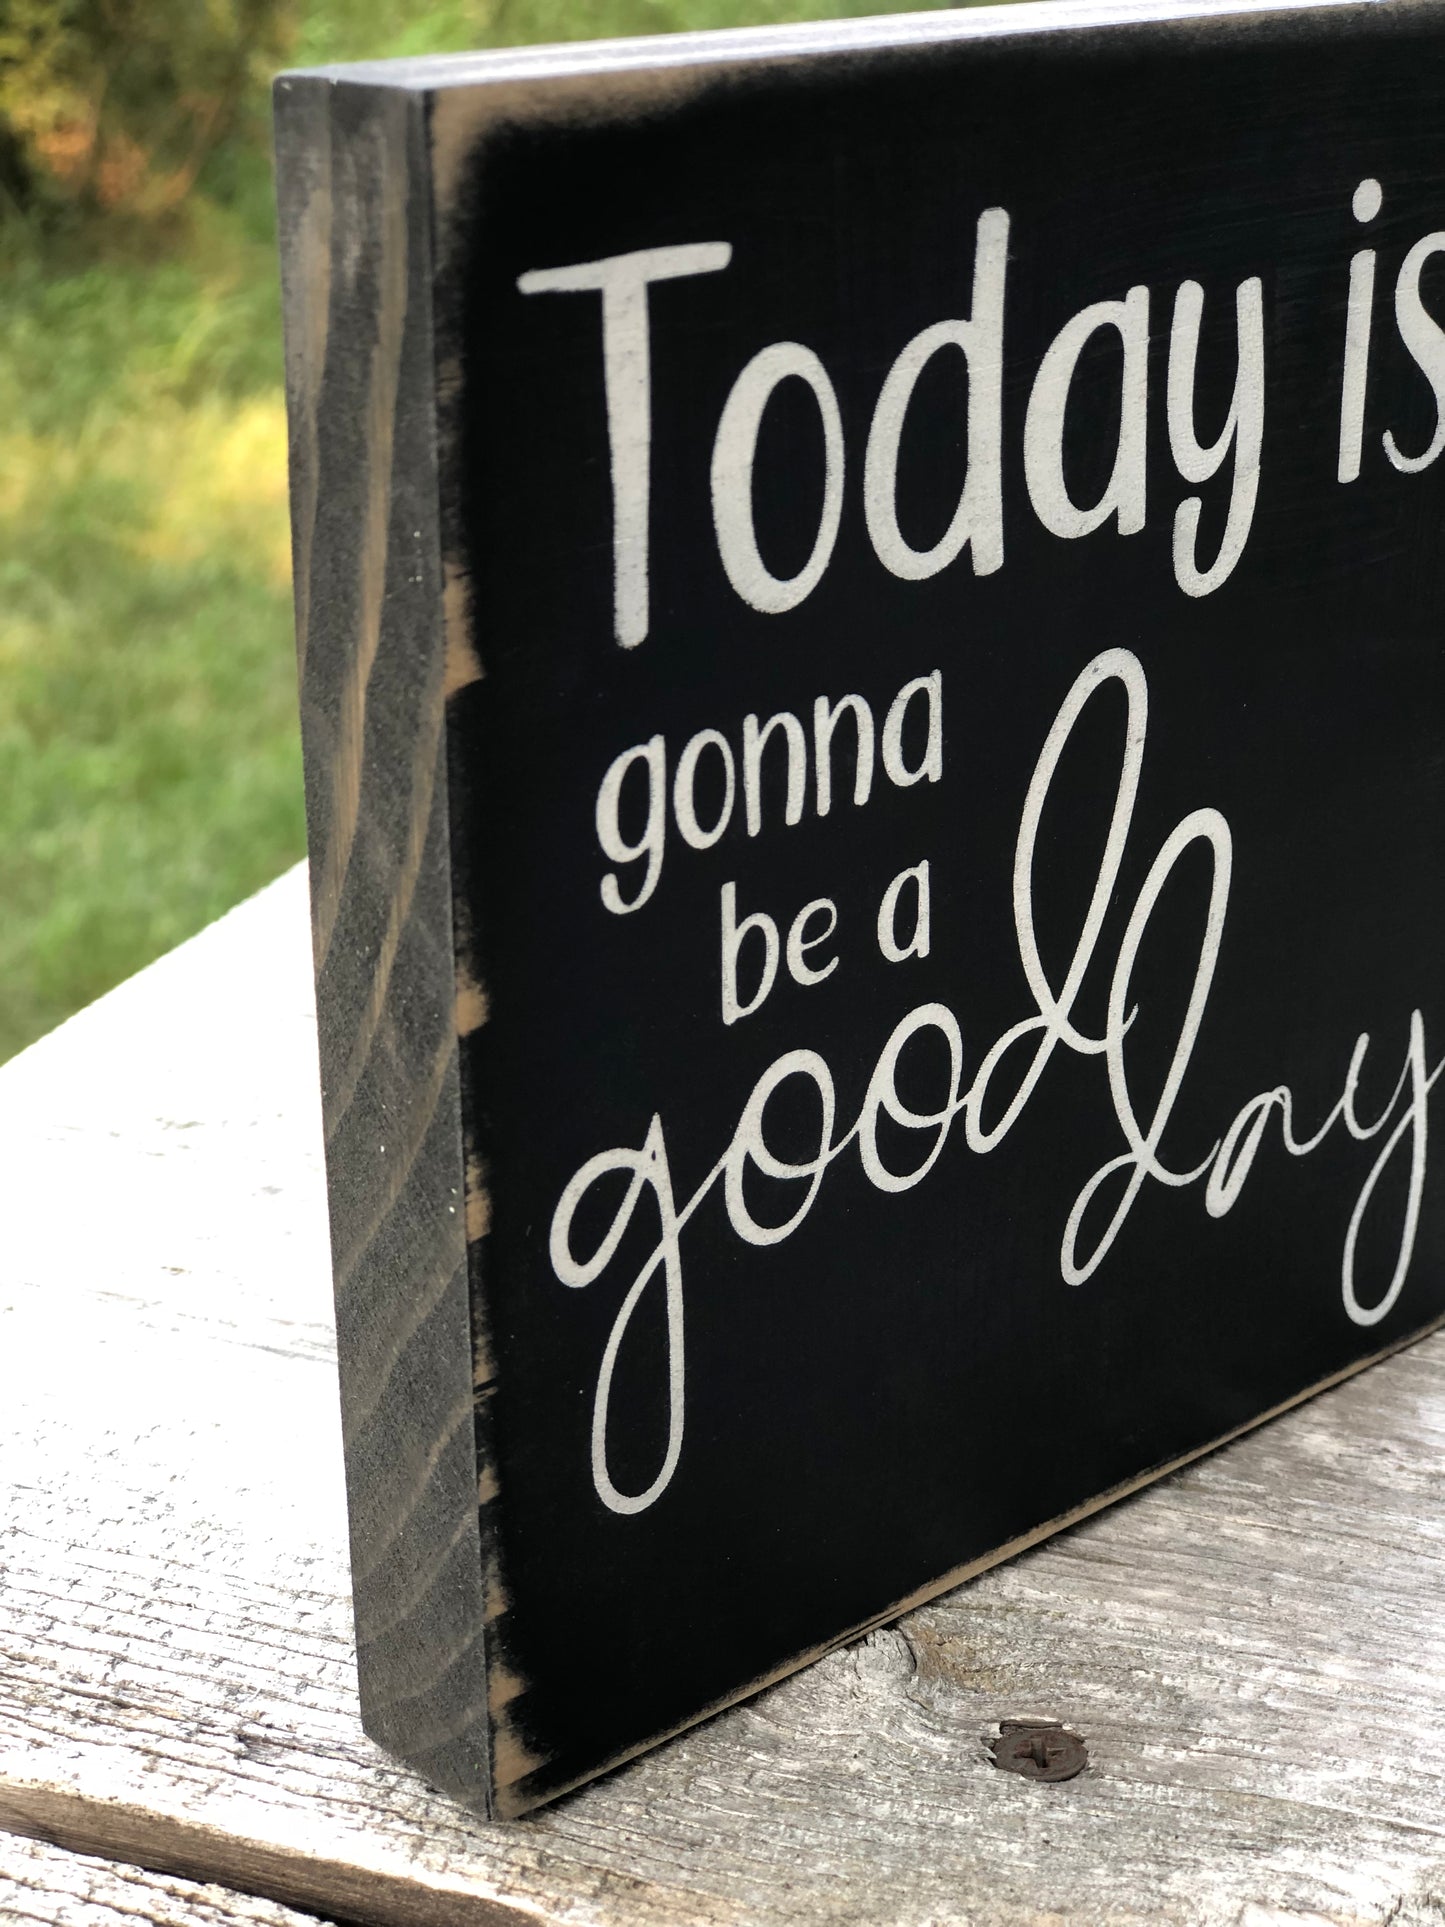 TODAY IS GONNA BE A GOOD DAY -WOOD SIGN